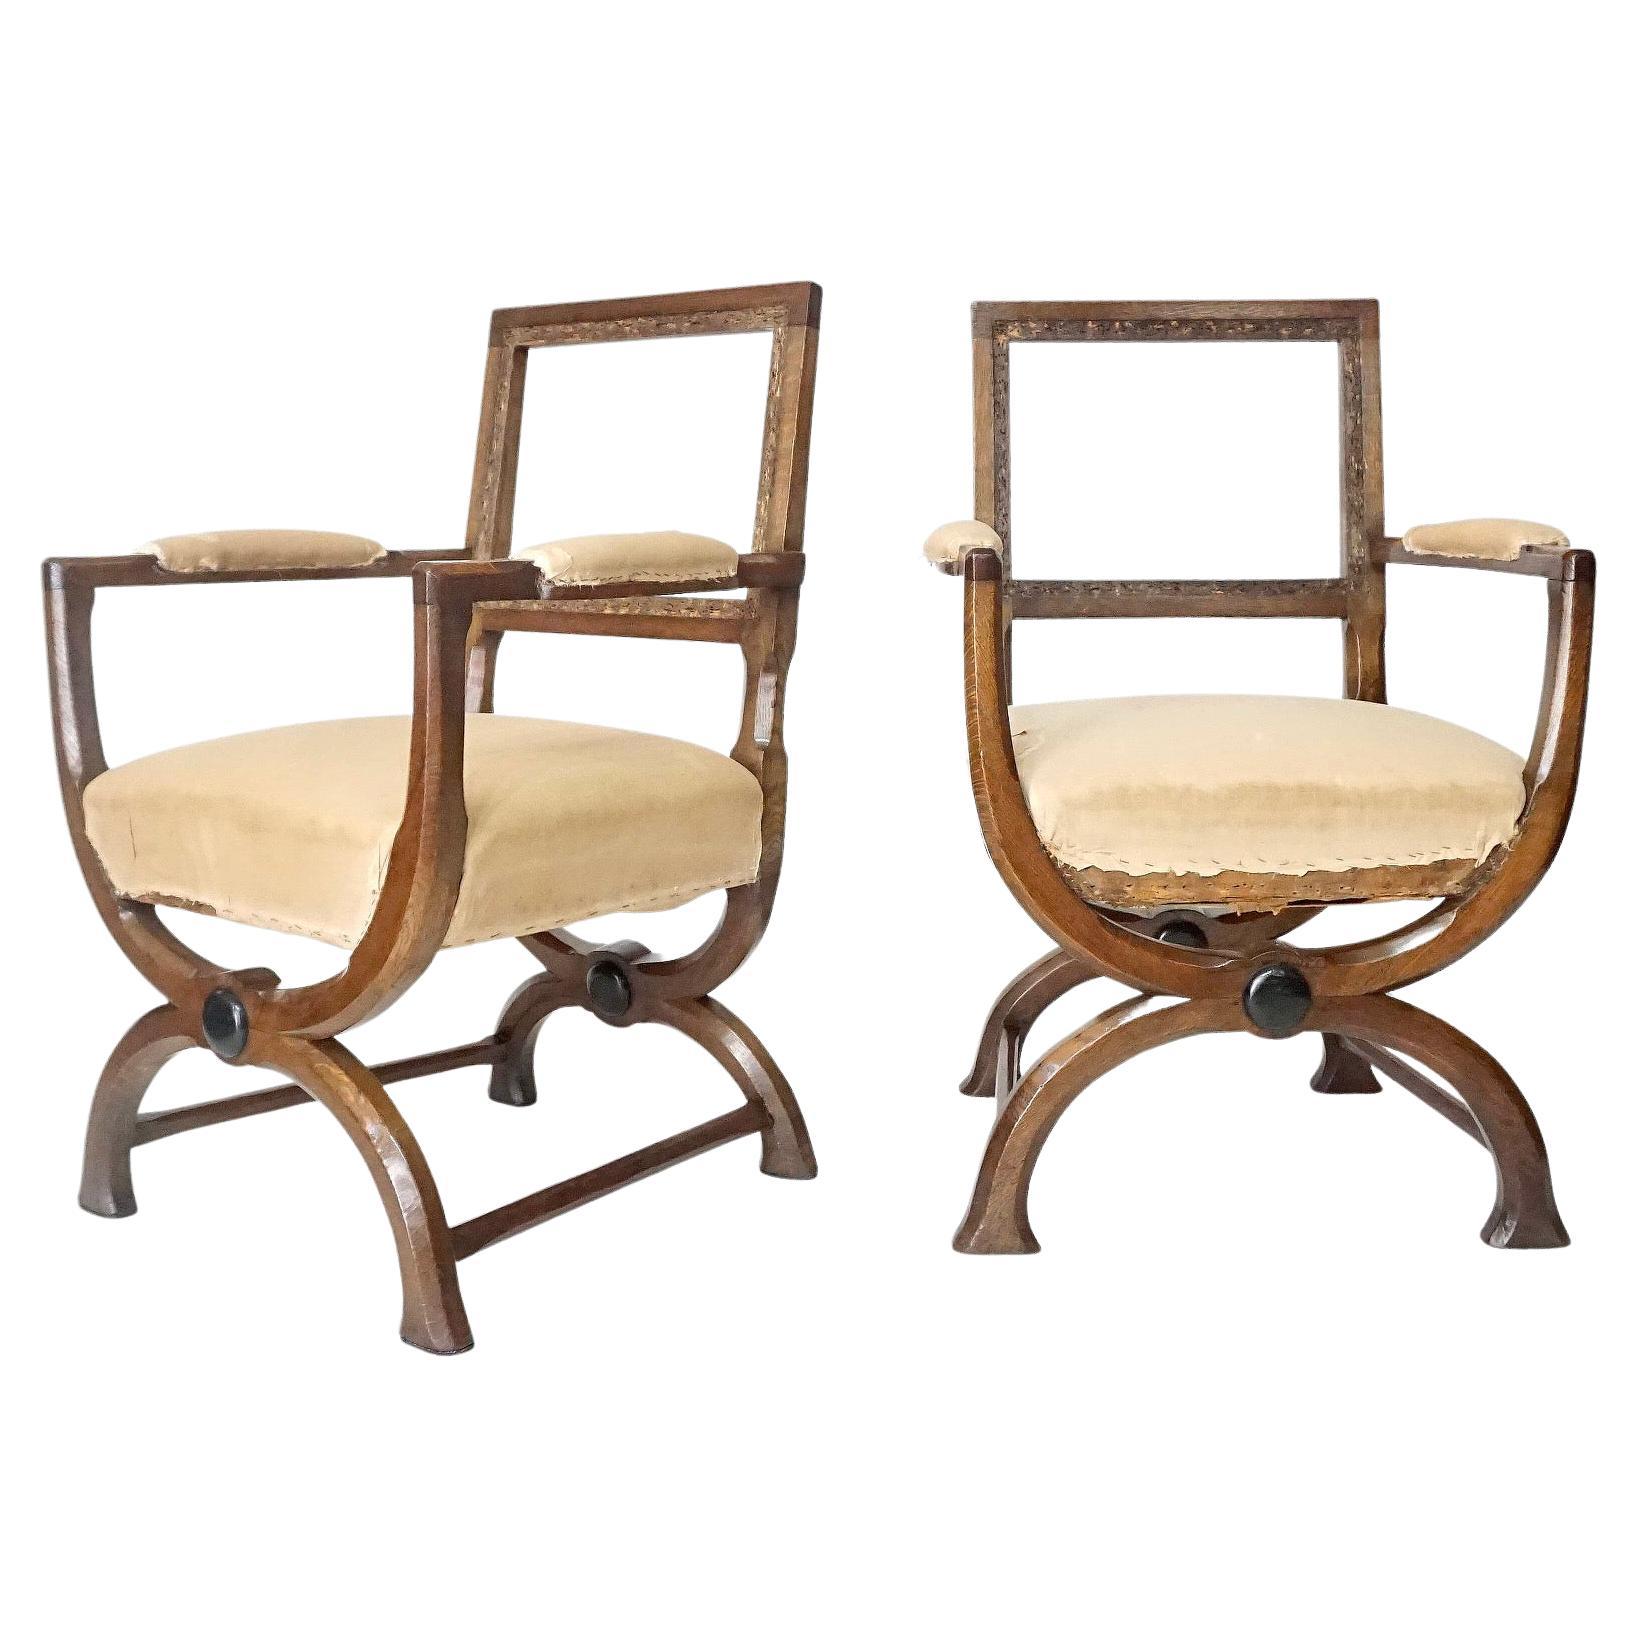 English Oak Gothic Style Curule Armchairs Attributed to A.W.N. Pugin, circa 1830 For Sale